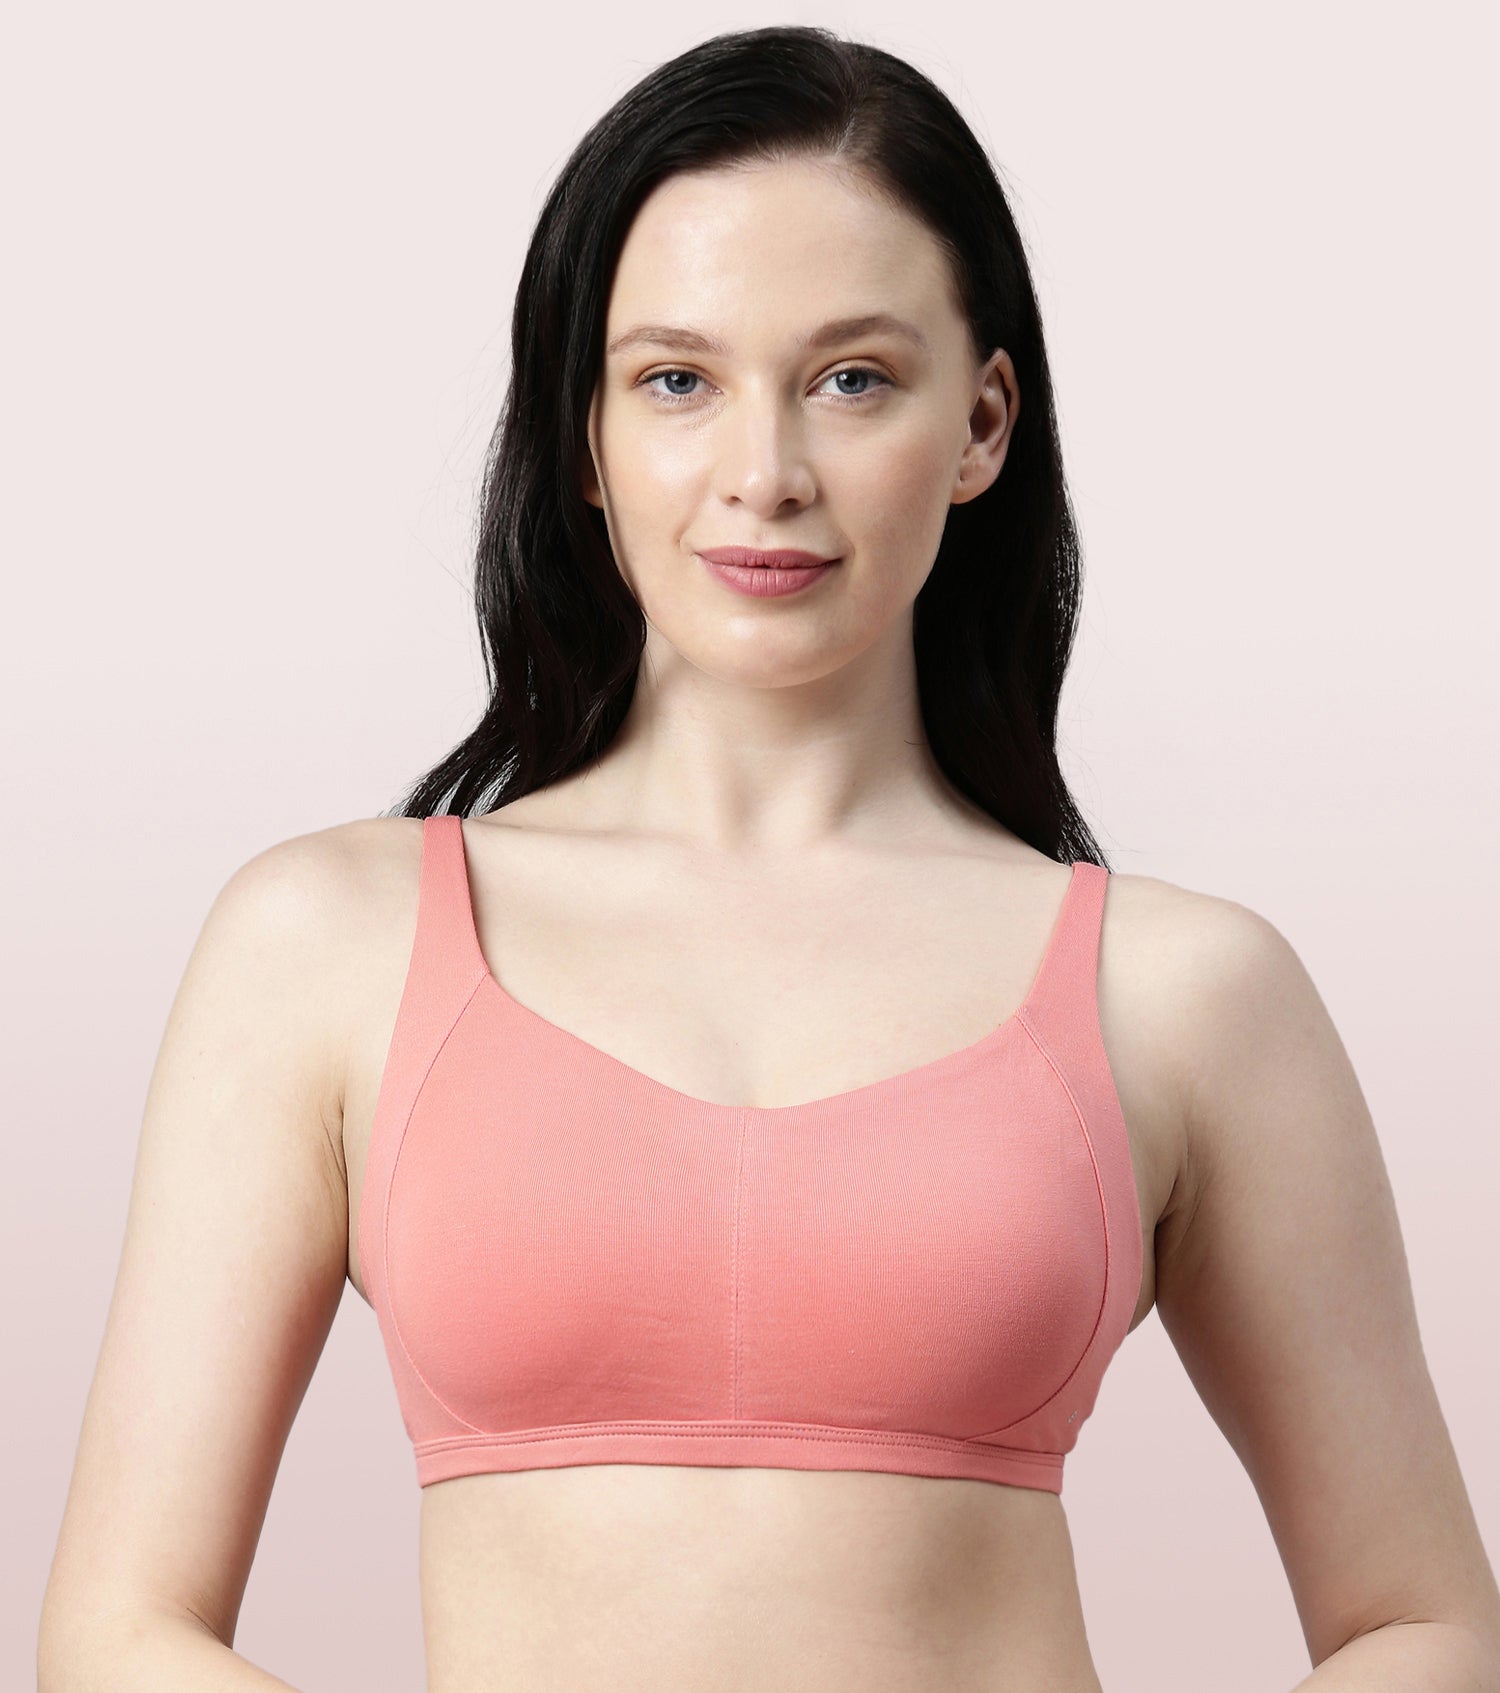 Buy Enamor A064 Cloud Soft Cotton Full Support Minimizer Bra for